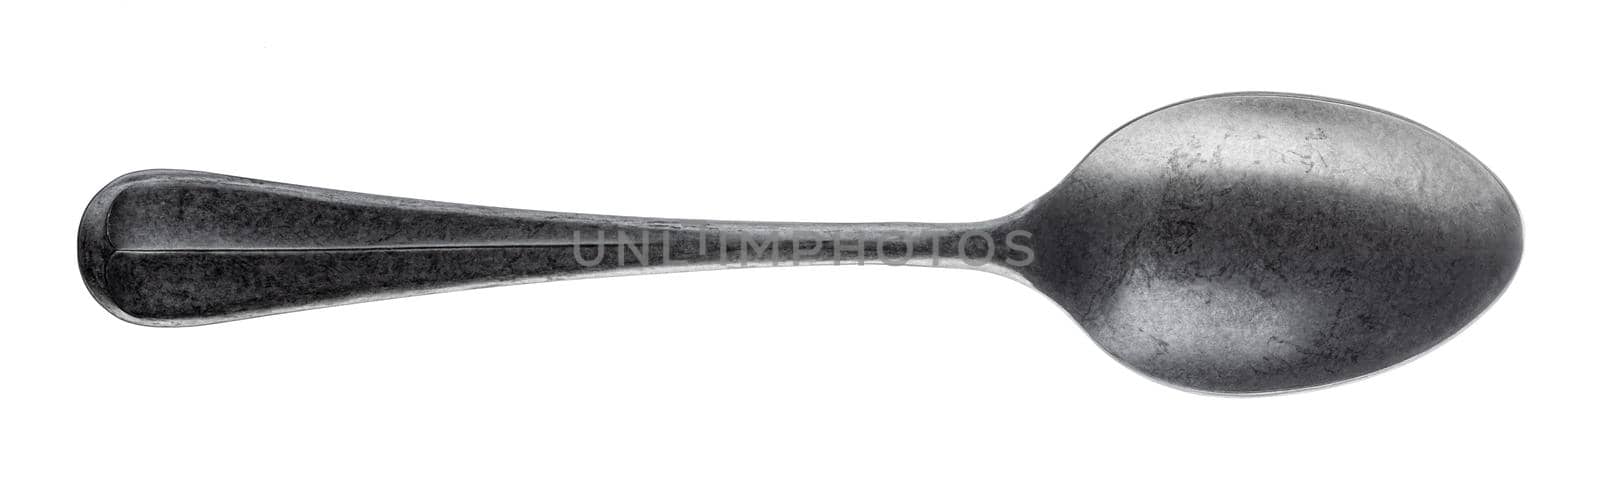 Plastic black spoon isolated on a white background by Fabrikasimf